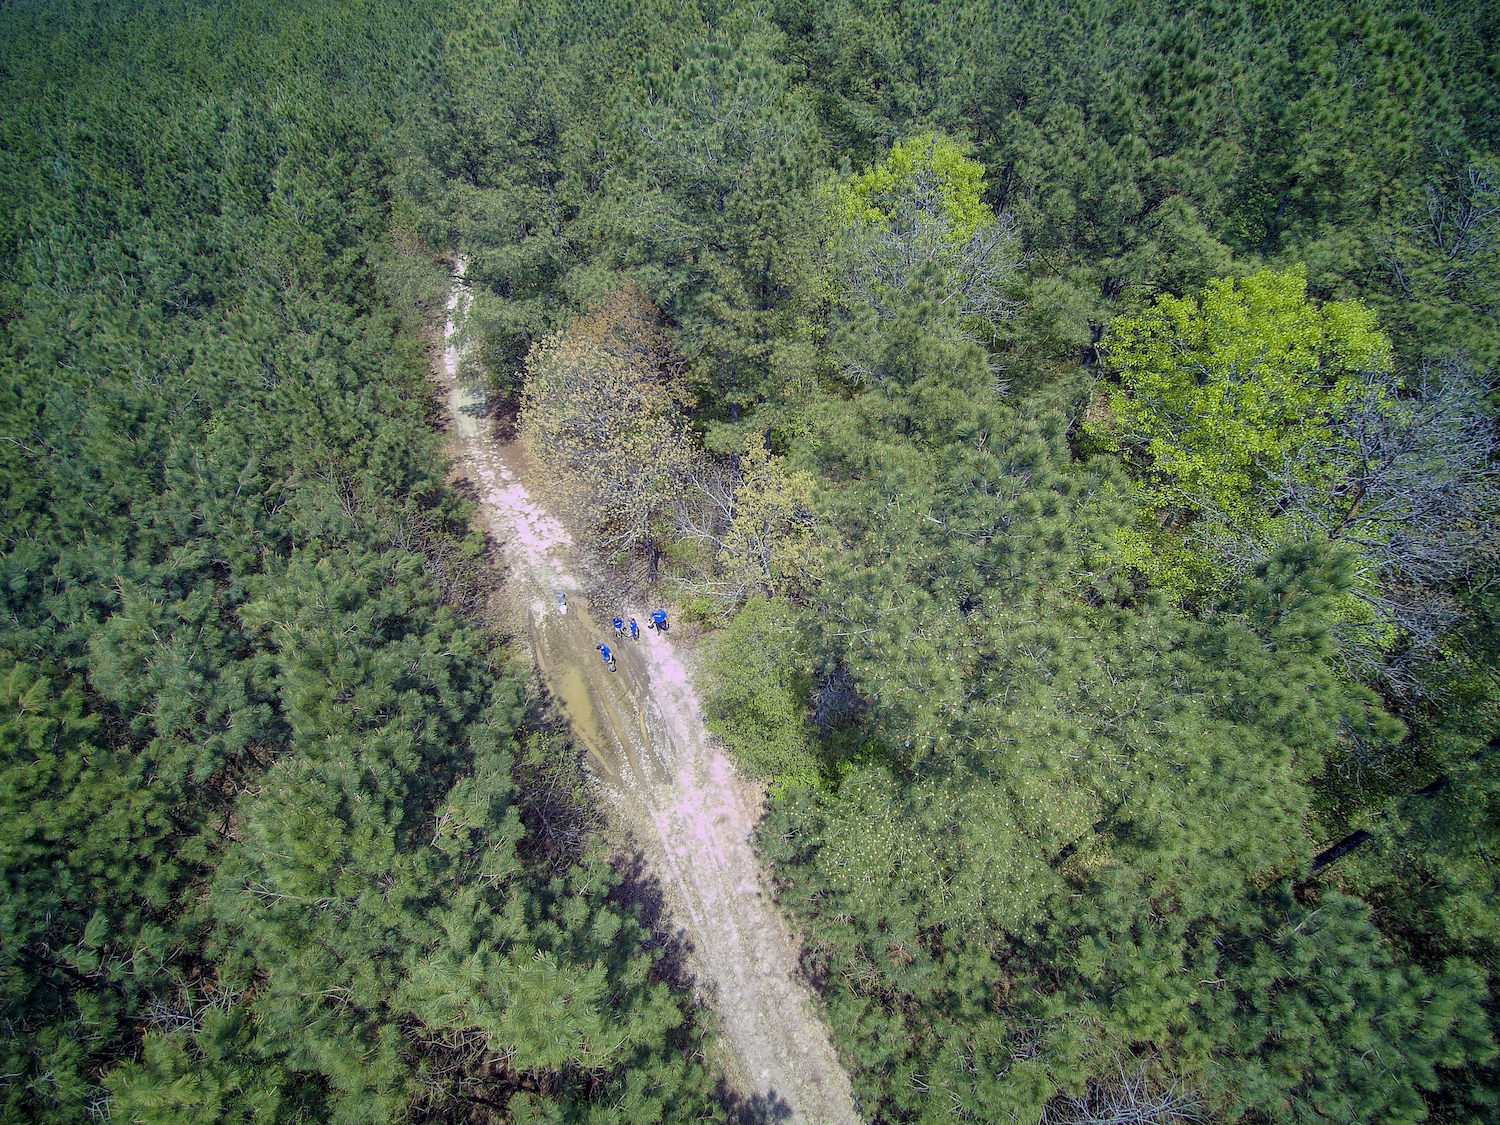 An aerial photo of a a forest with a dirt path in the center.